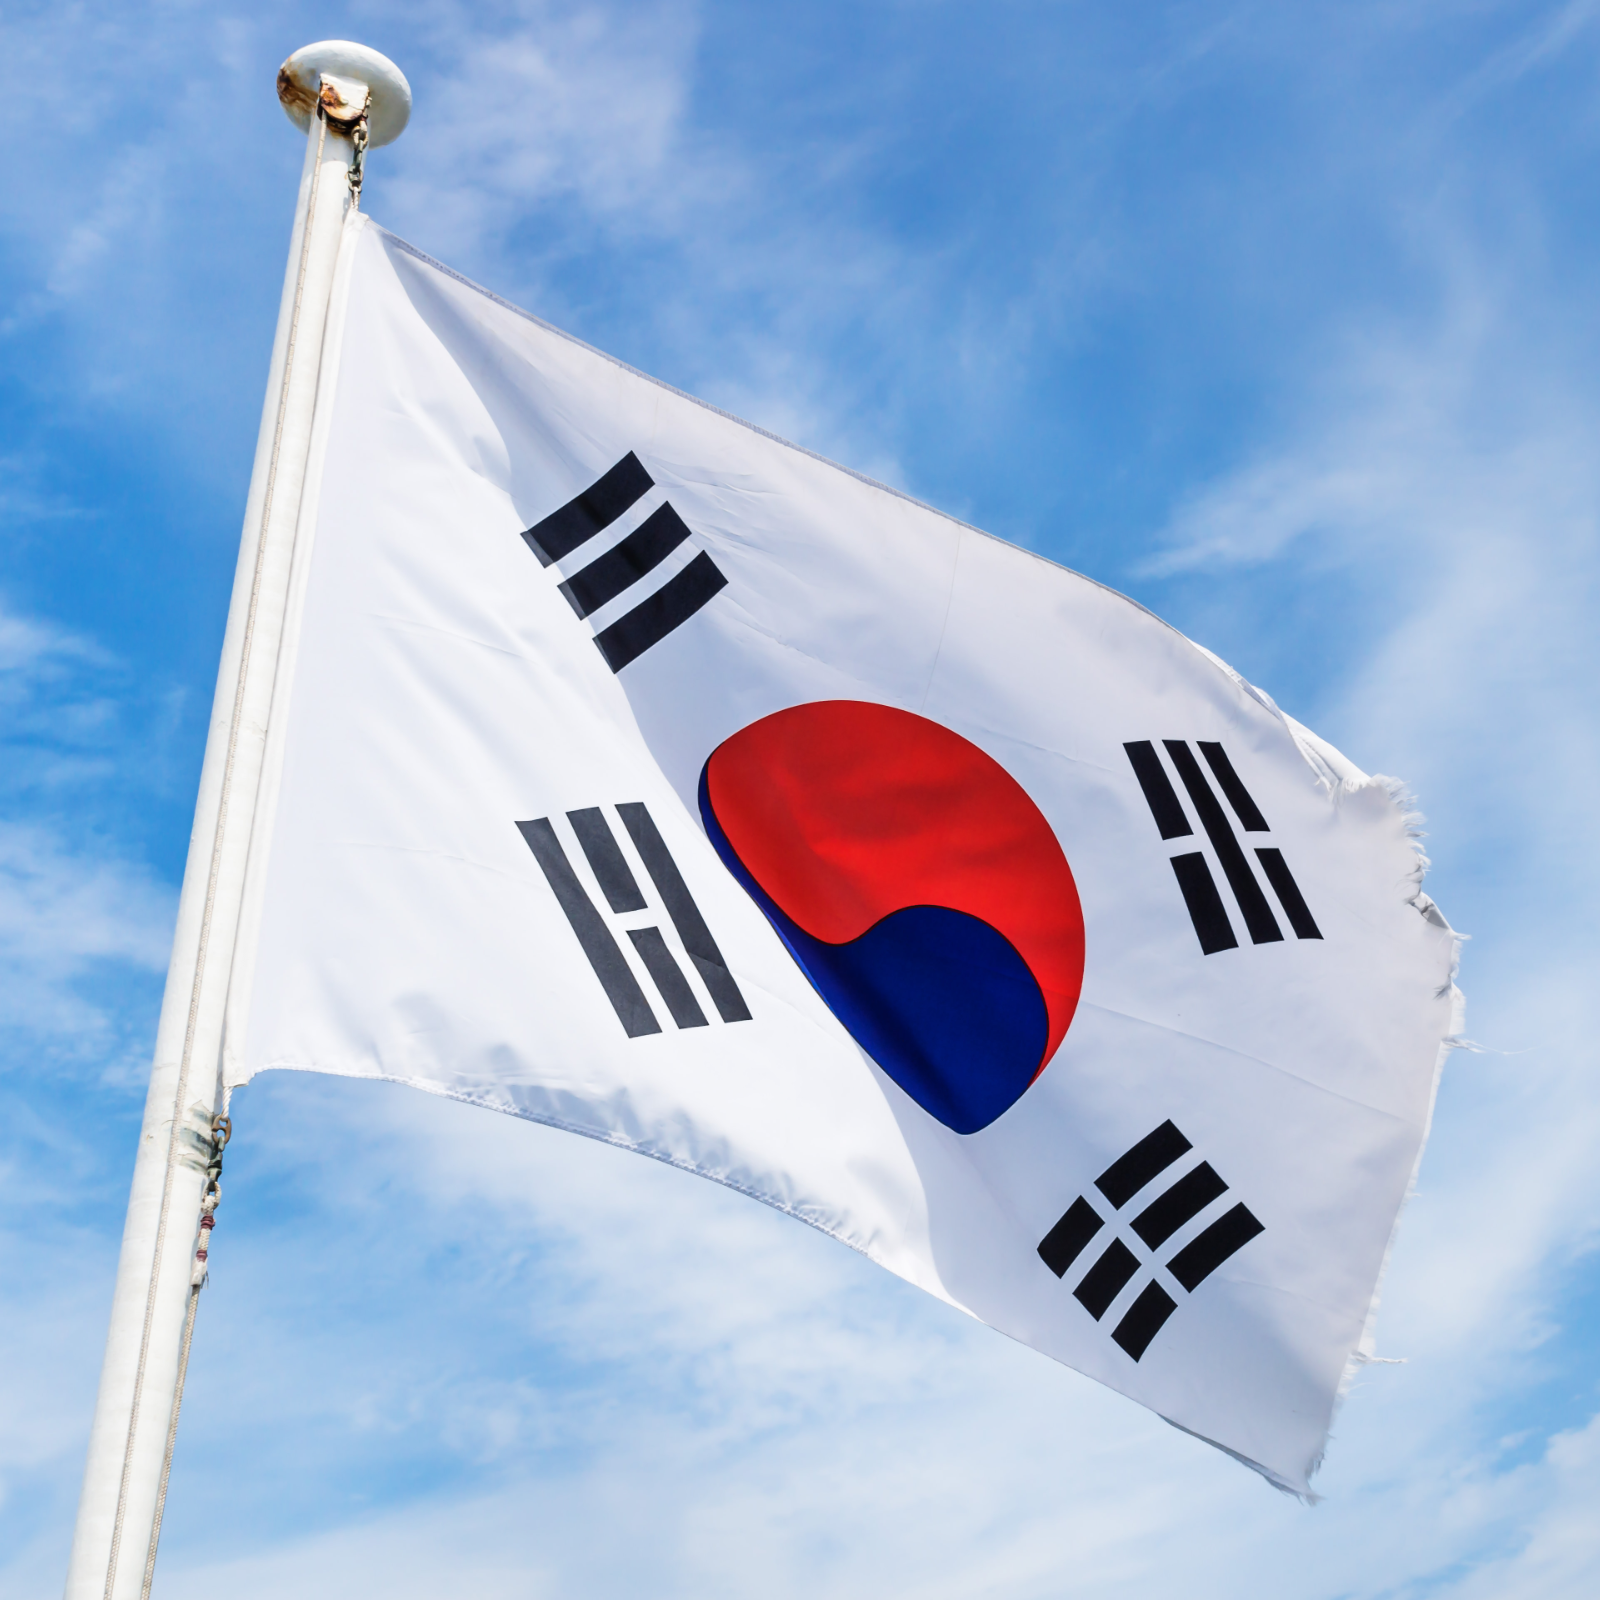 South Korea Cracks Down on Unauthorized Cryptocurrency Funds